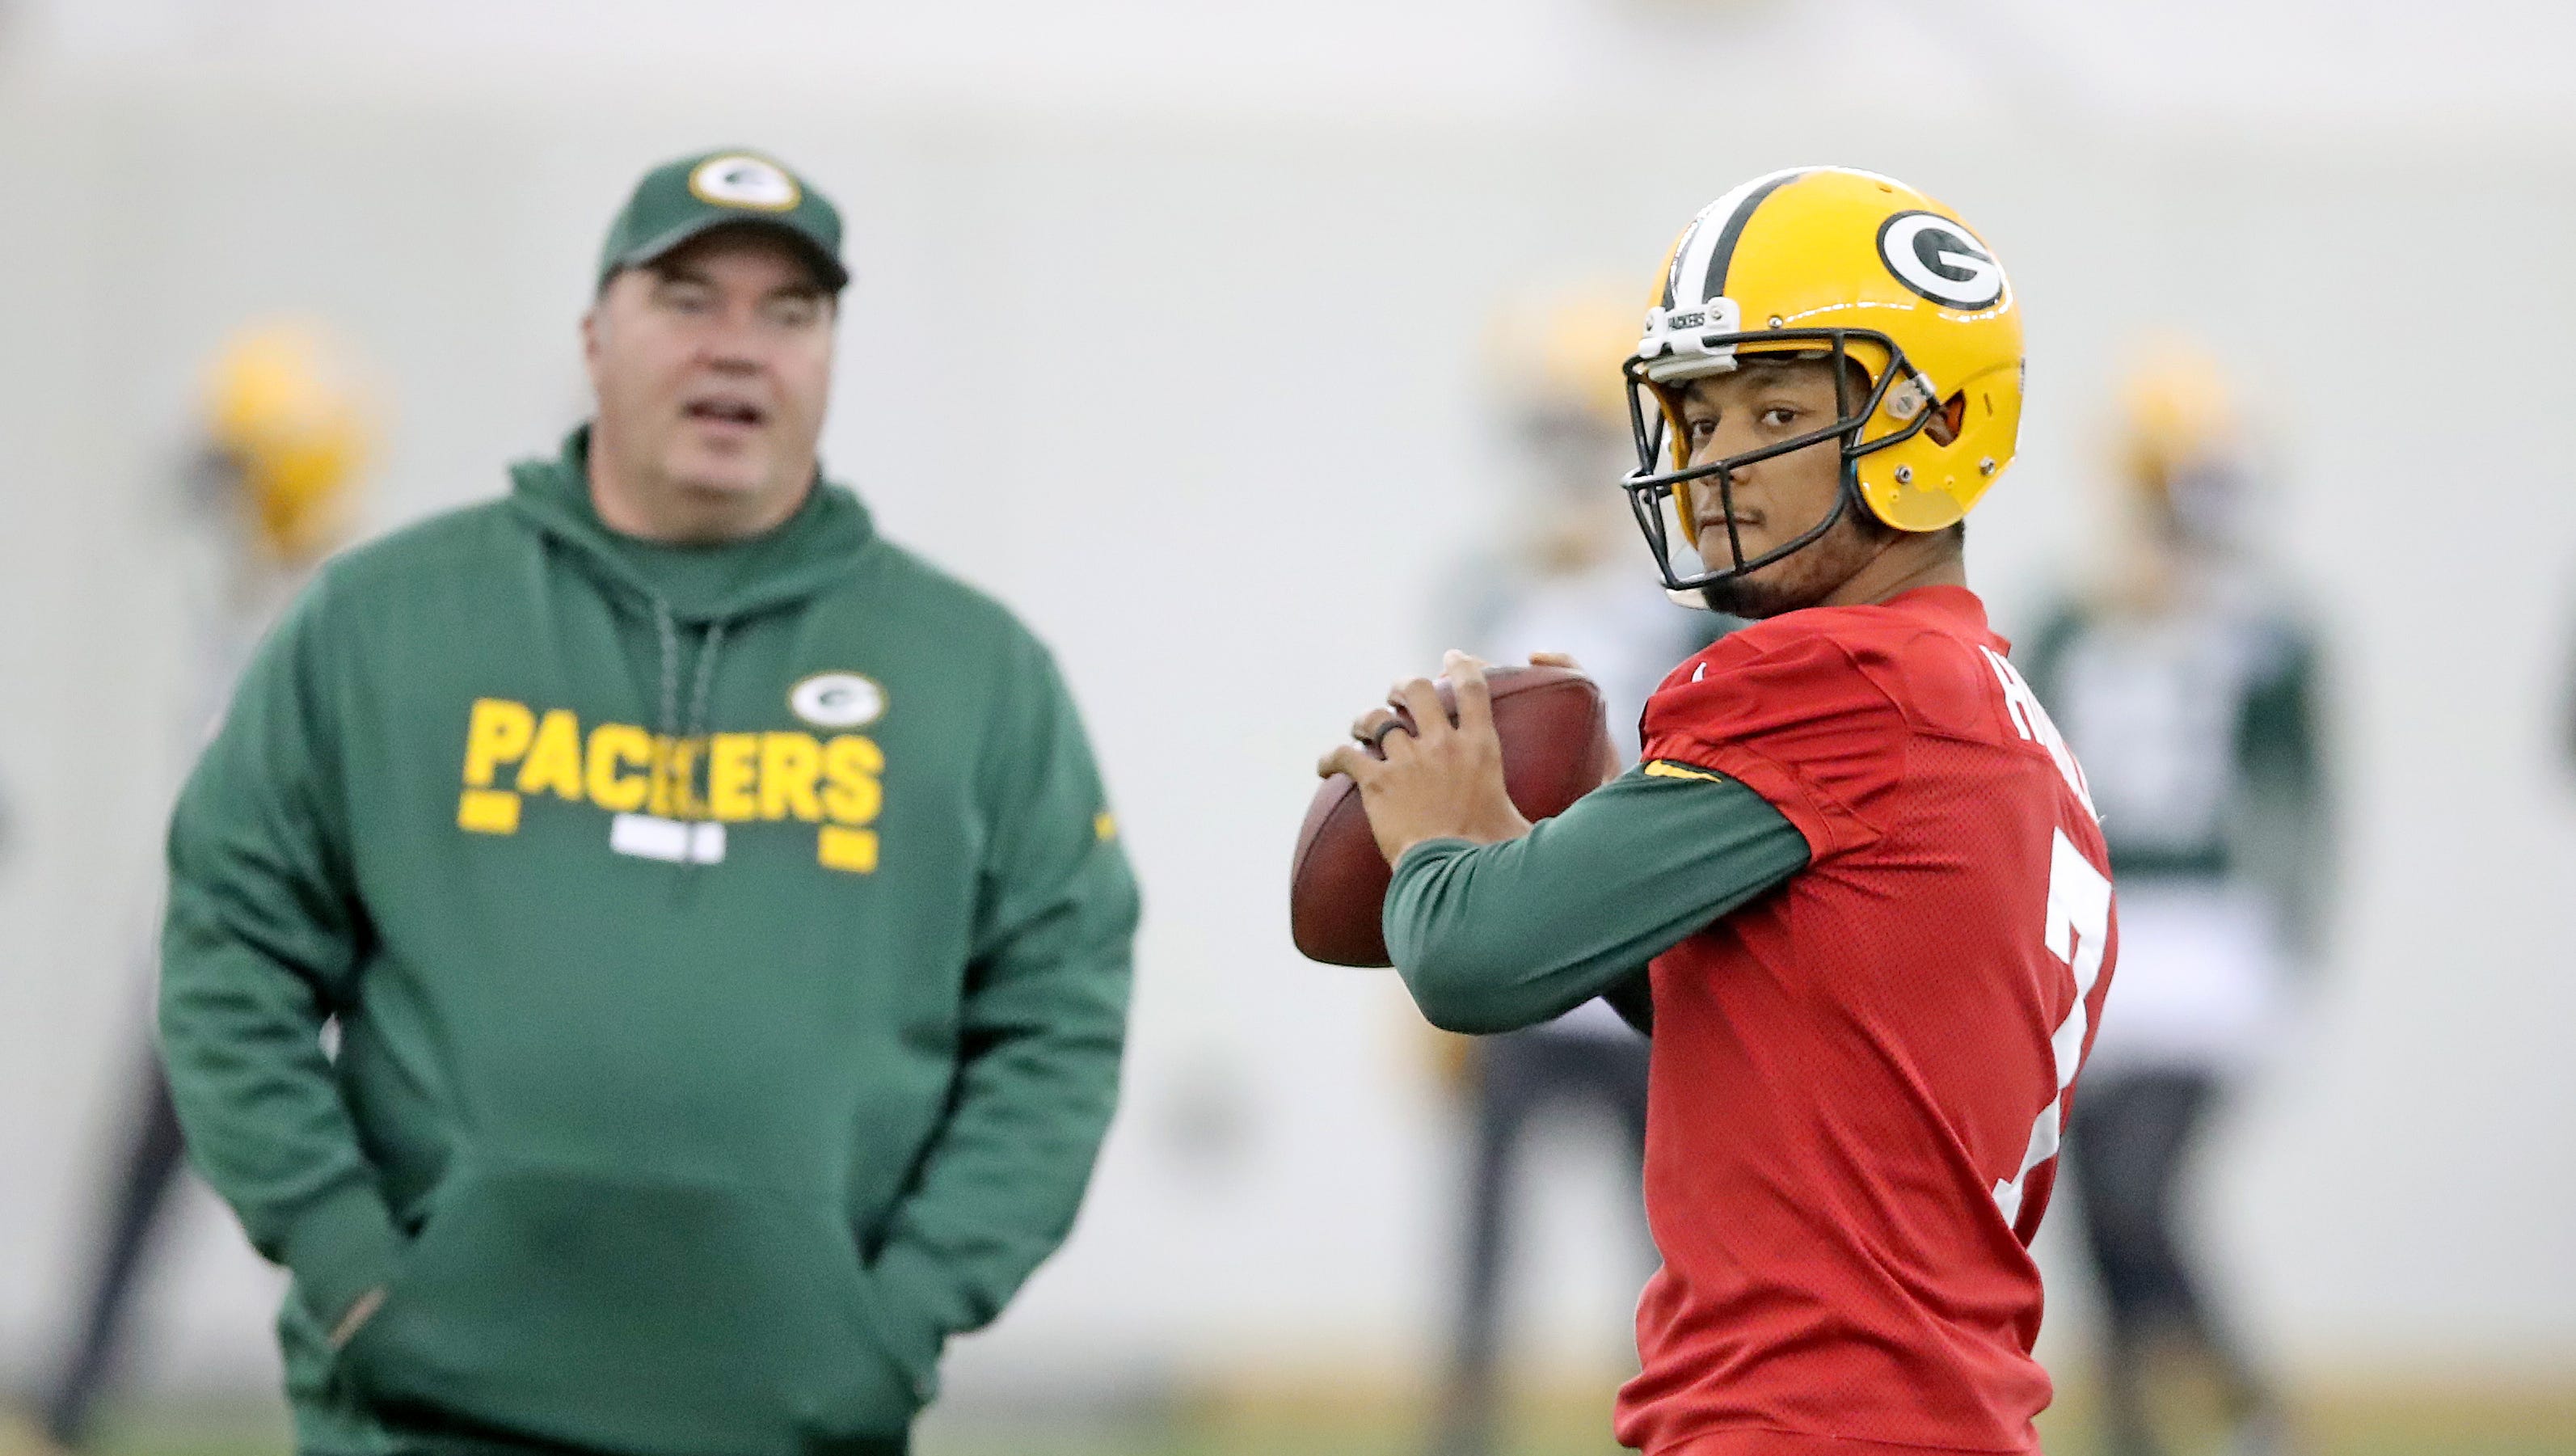 Green Bay Packers quarterback Brett Hundley (7) throws as coach Mike McCarthy looks on during practice on Oct. 31, 2017, in the Don Hutson Center.